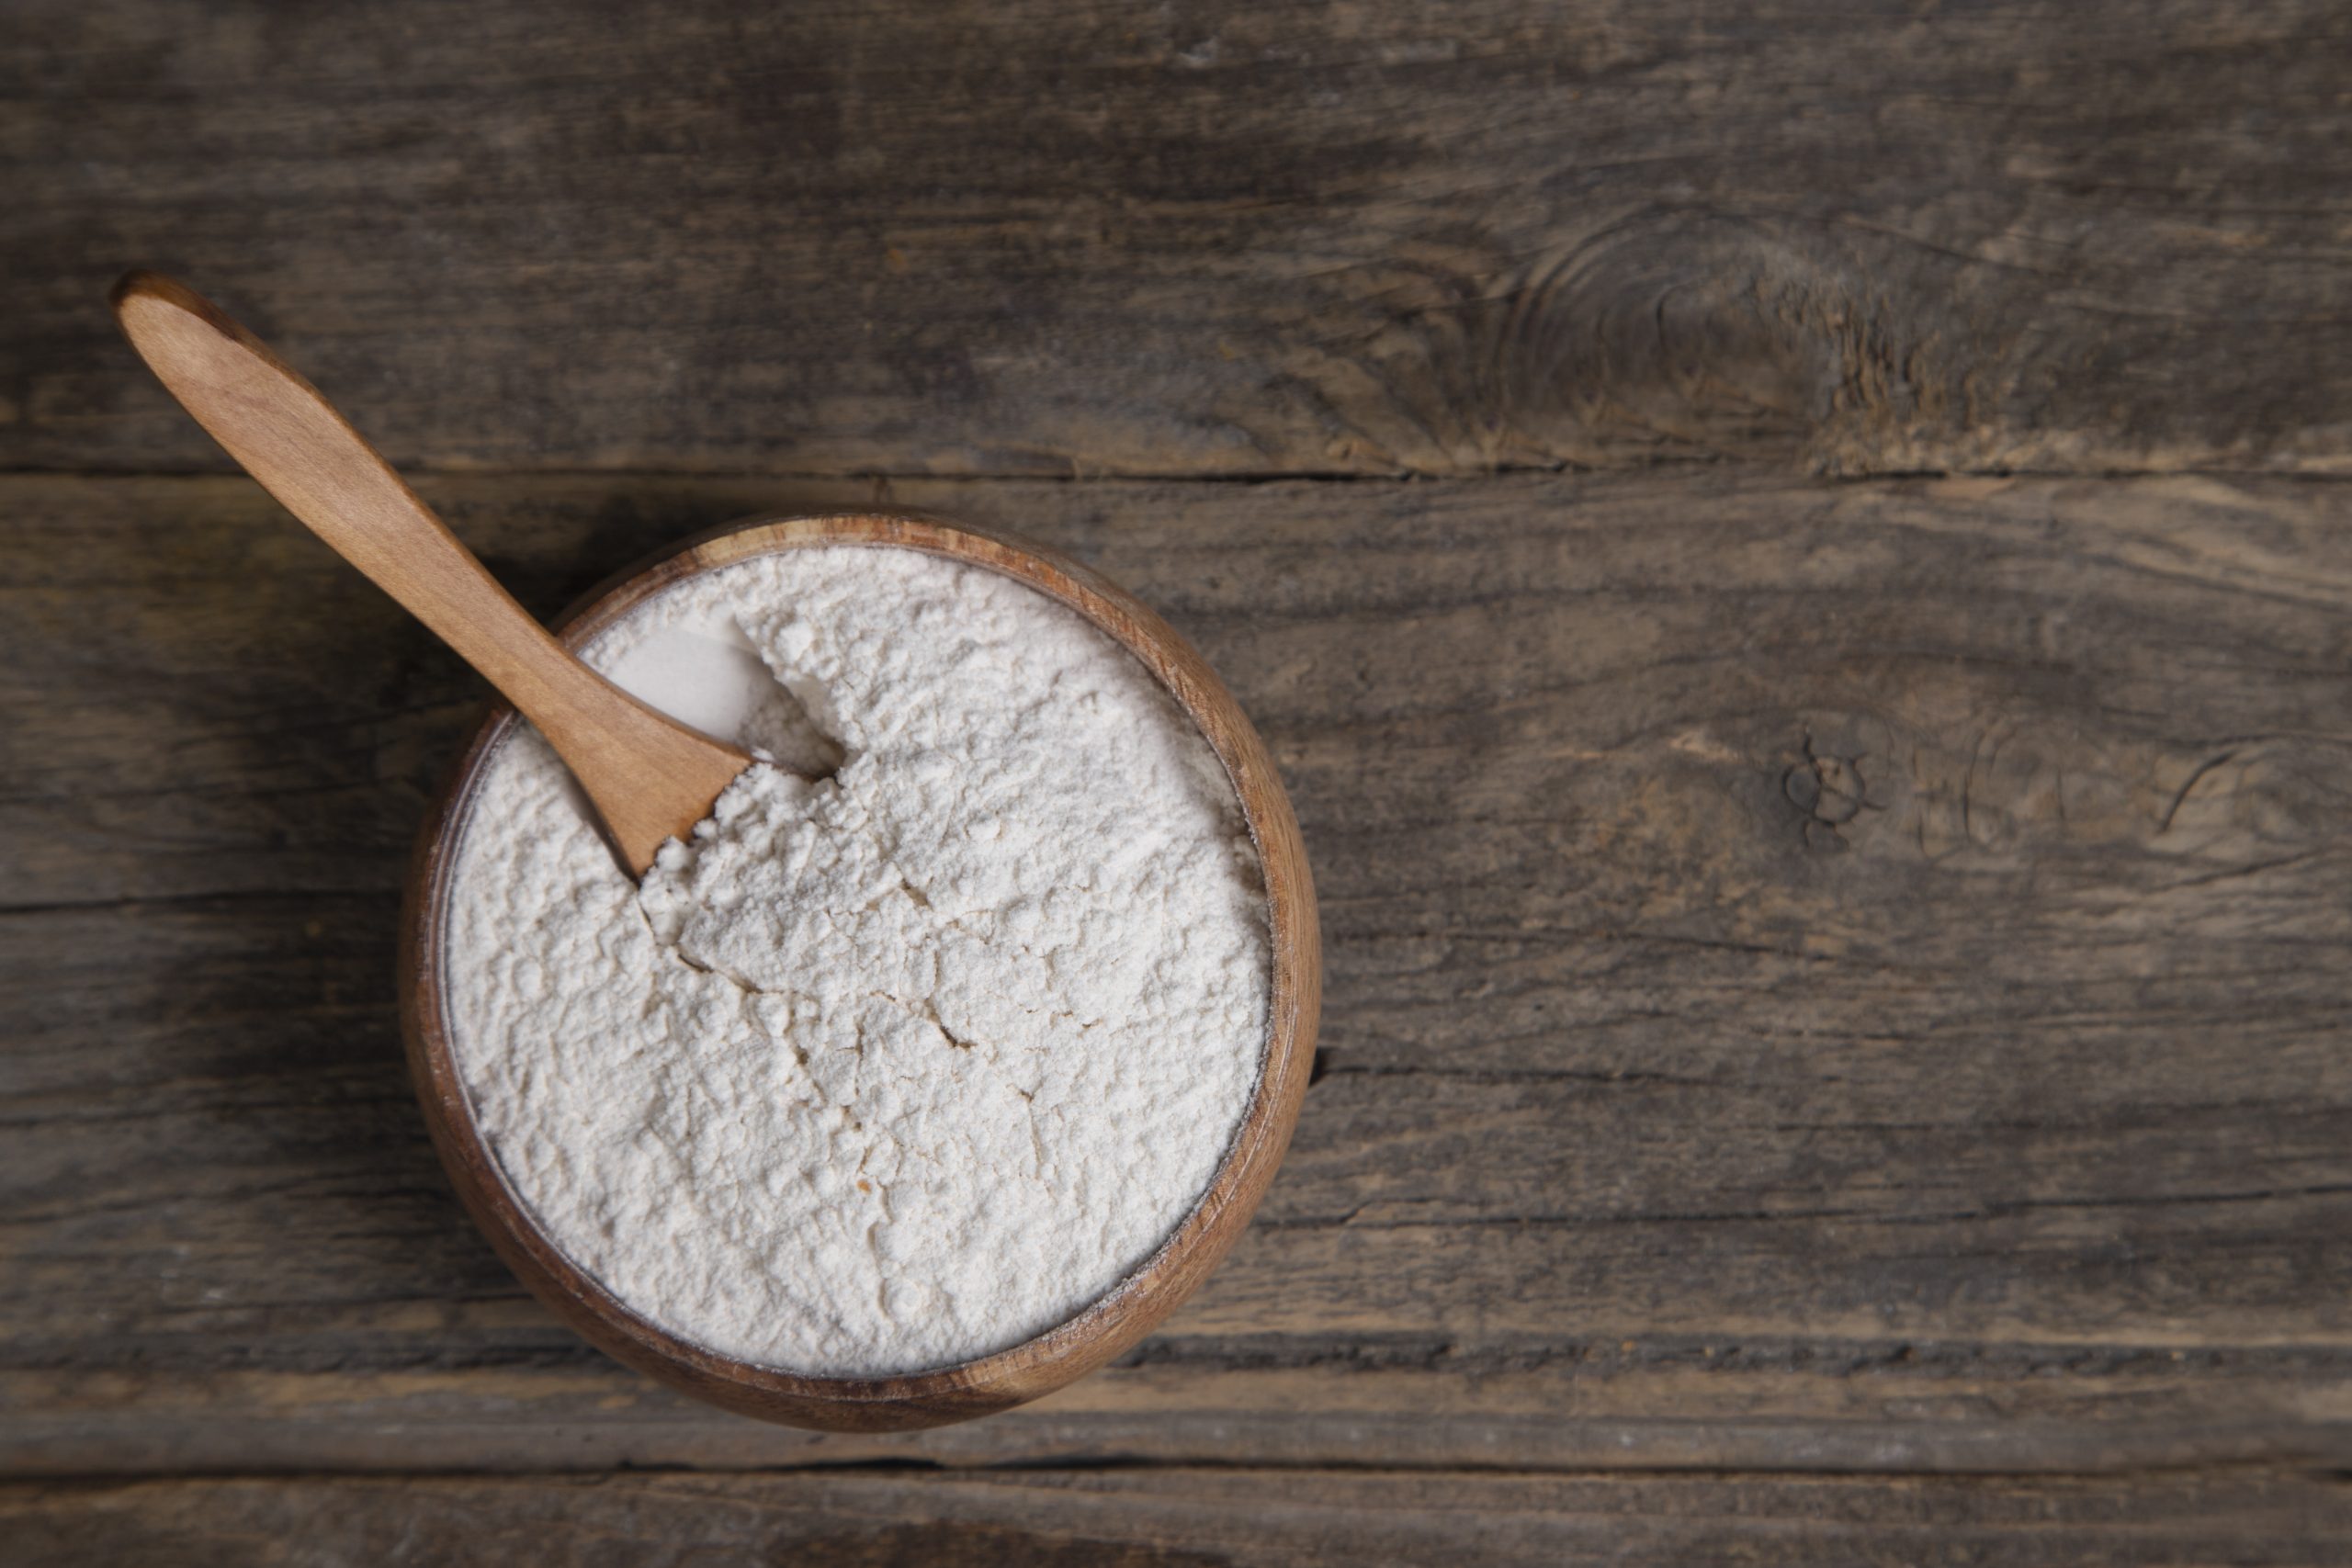 How to Store Baking Soda Safely and Effectively